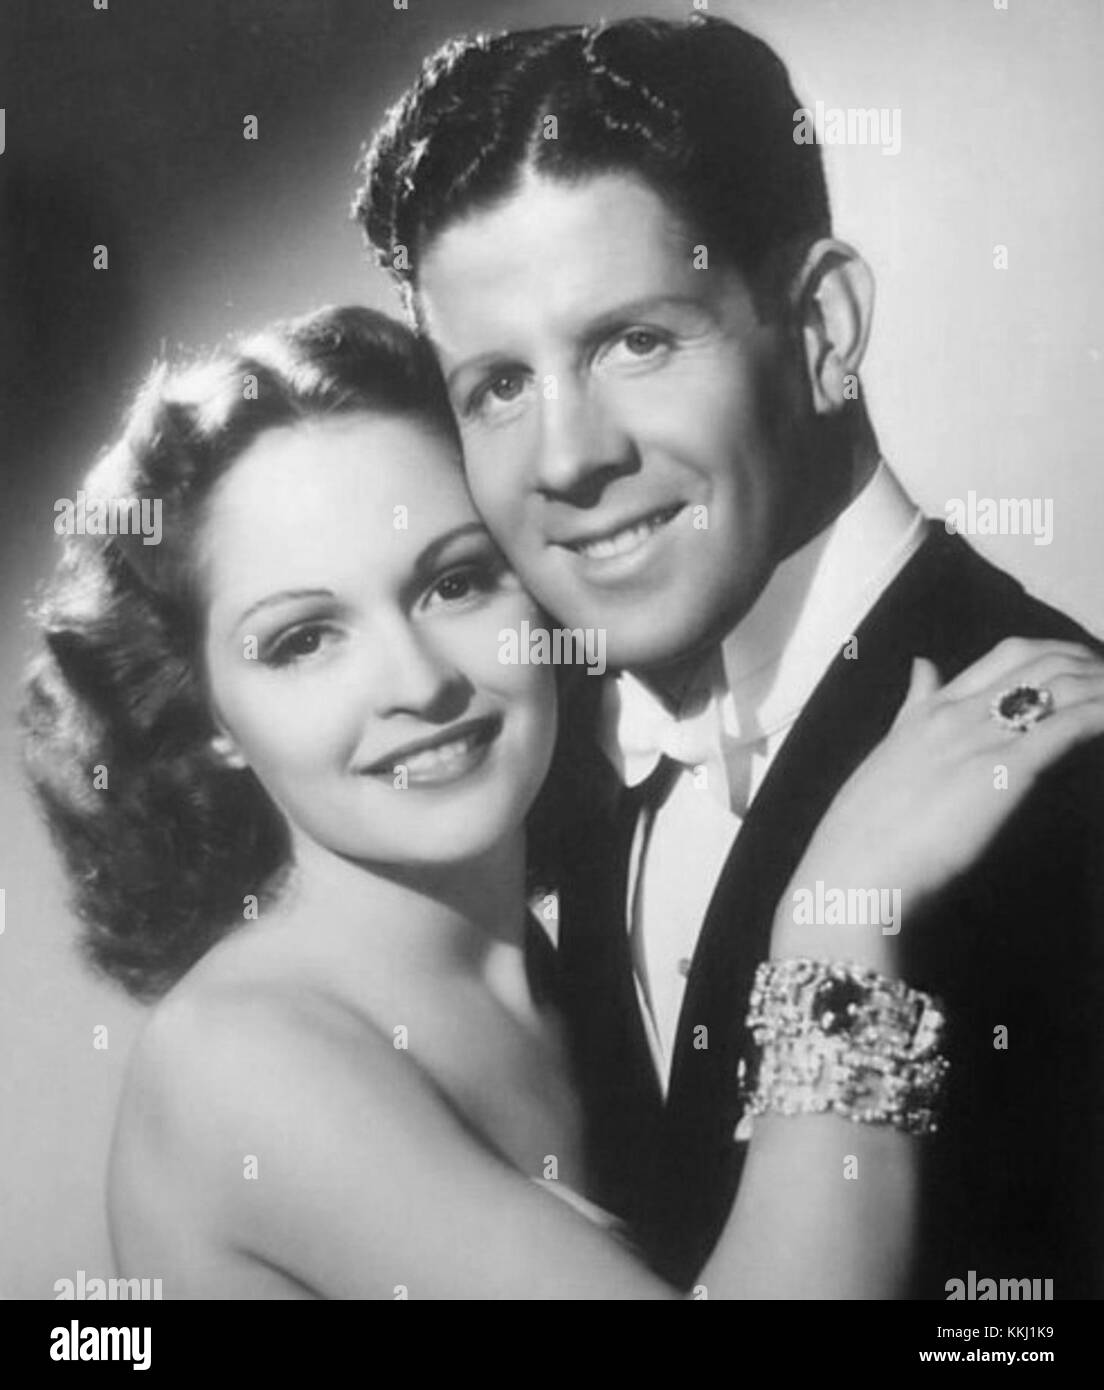 Mary Healy-Rudy Vallee in Second Fiddle still Stock Photo